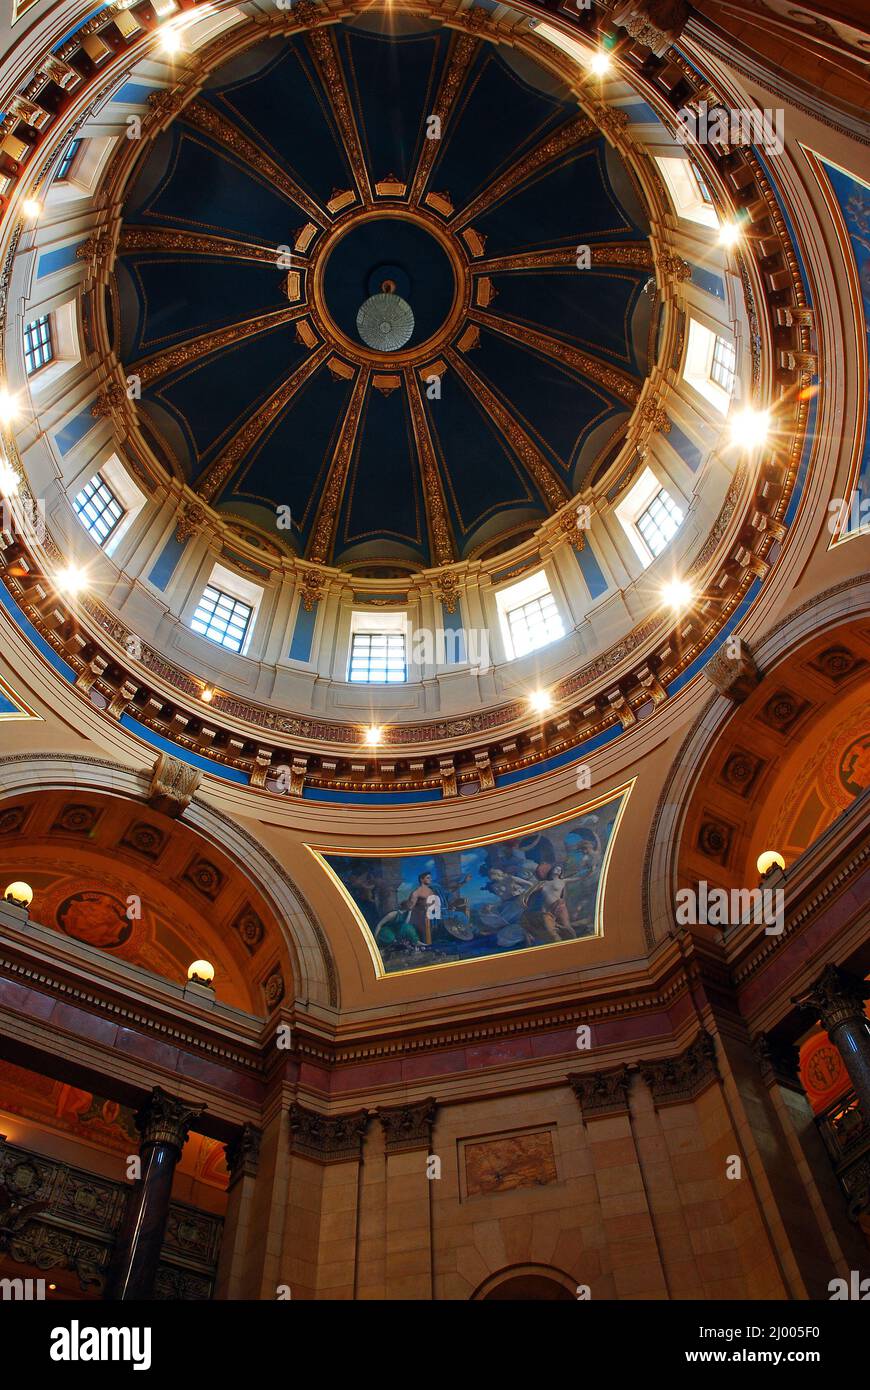 The interior of the dome of the Minnesota State Capitol, St Paul Stock Photo